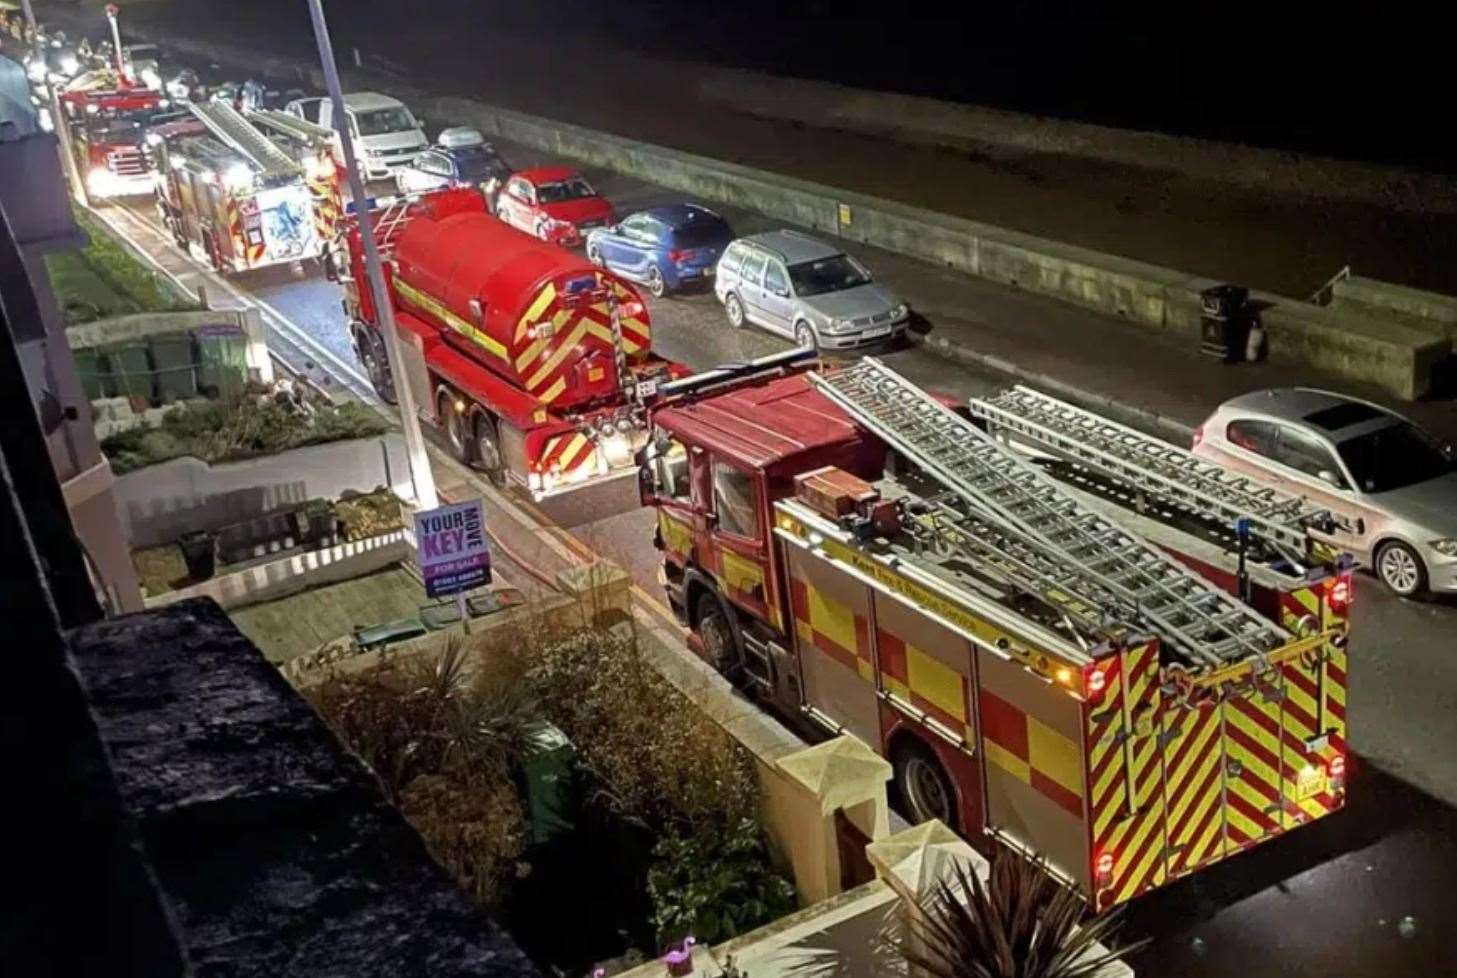 The pensioner's body was discovered by fire crews on Christmas day. Picture: UKNIP